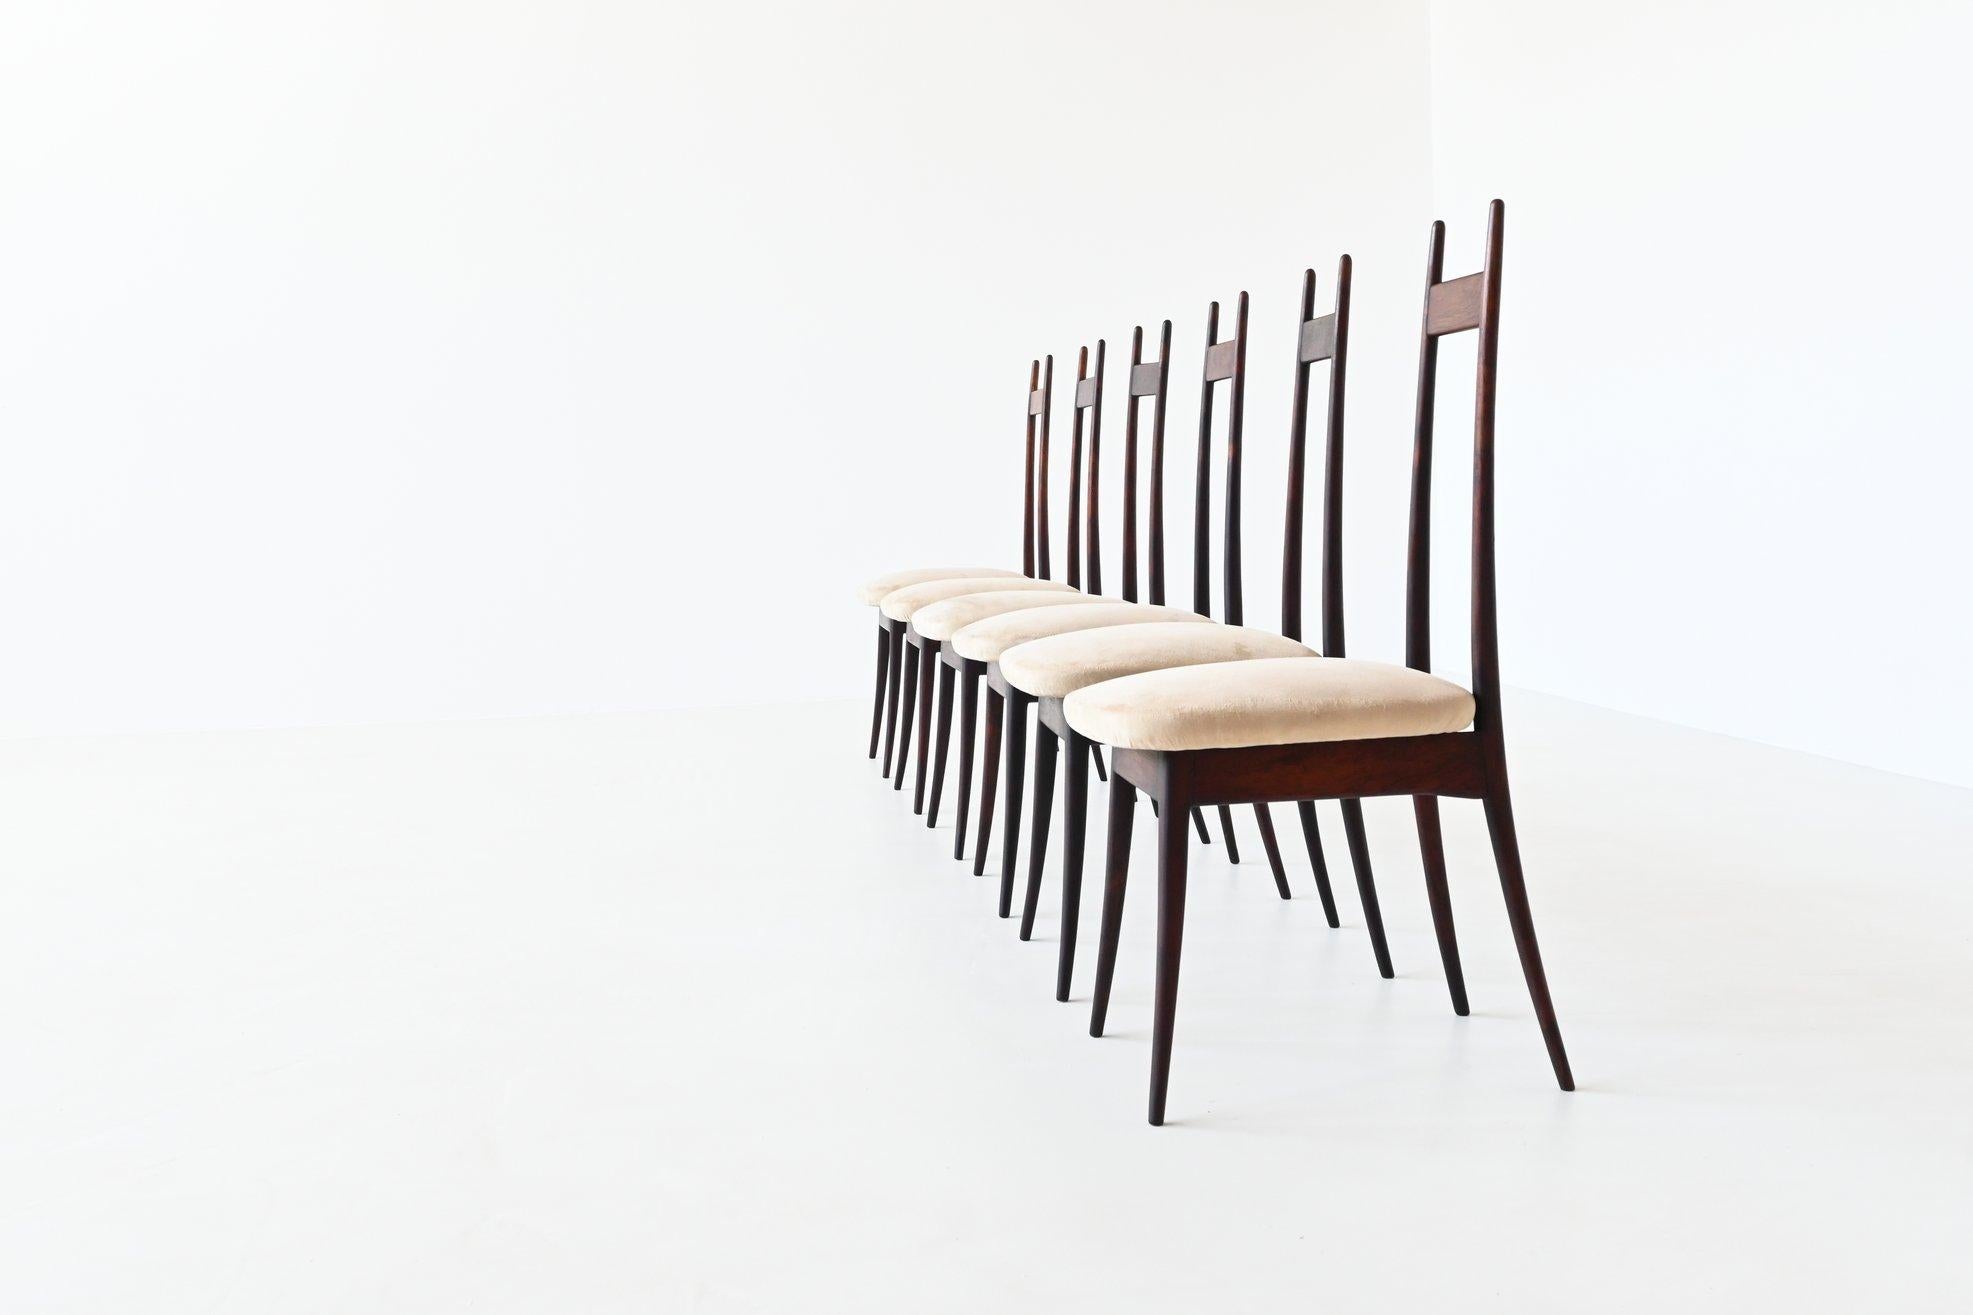 Stunning set of six dining chairs designed by Angelo Mangiarotti for Frigerio, Italy 1959. These amazingly shaped chairs are made of beautiful grained solid Brazilian rosewood and the seats are upholstered with crème-white suede fabric. This model